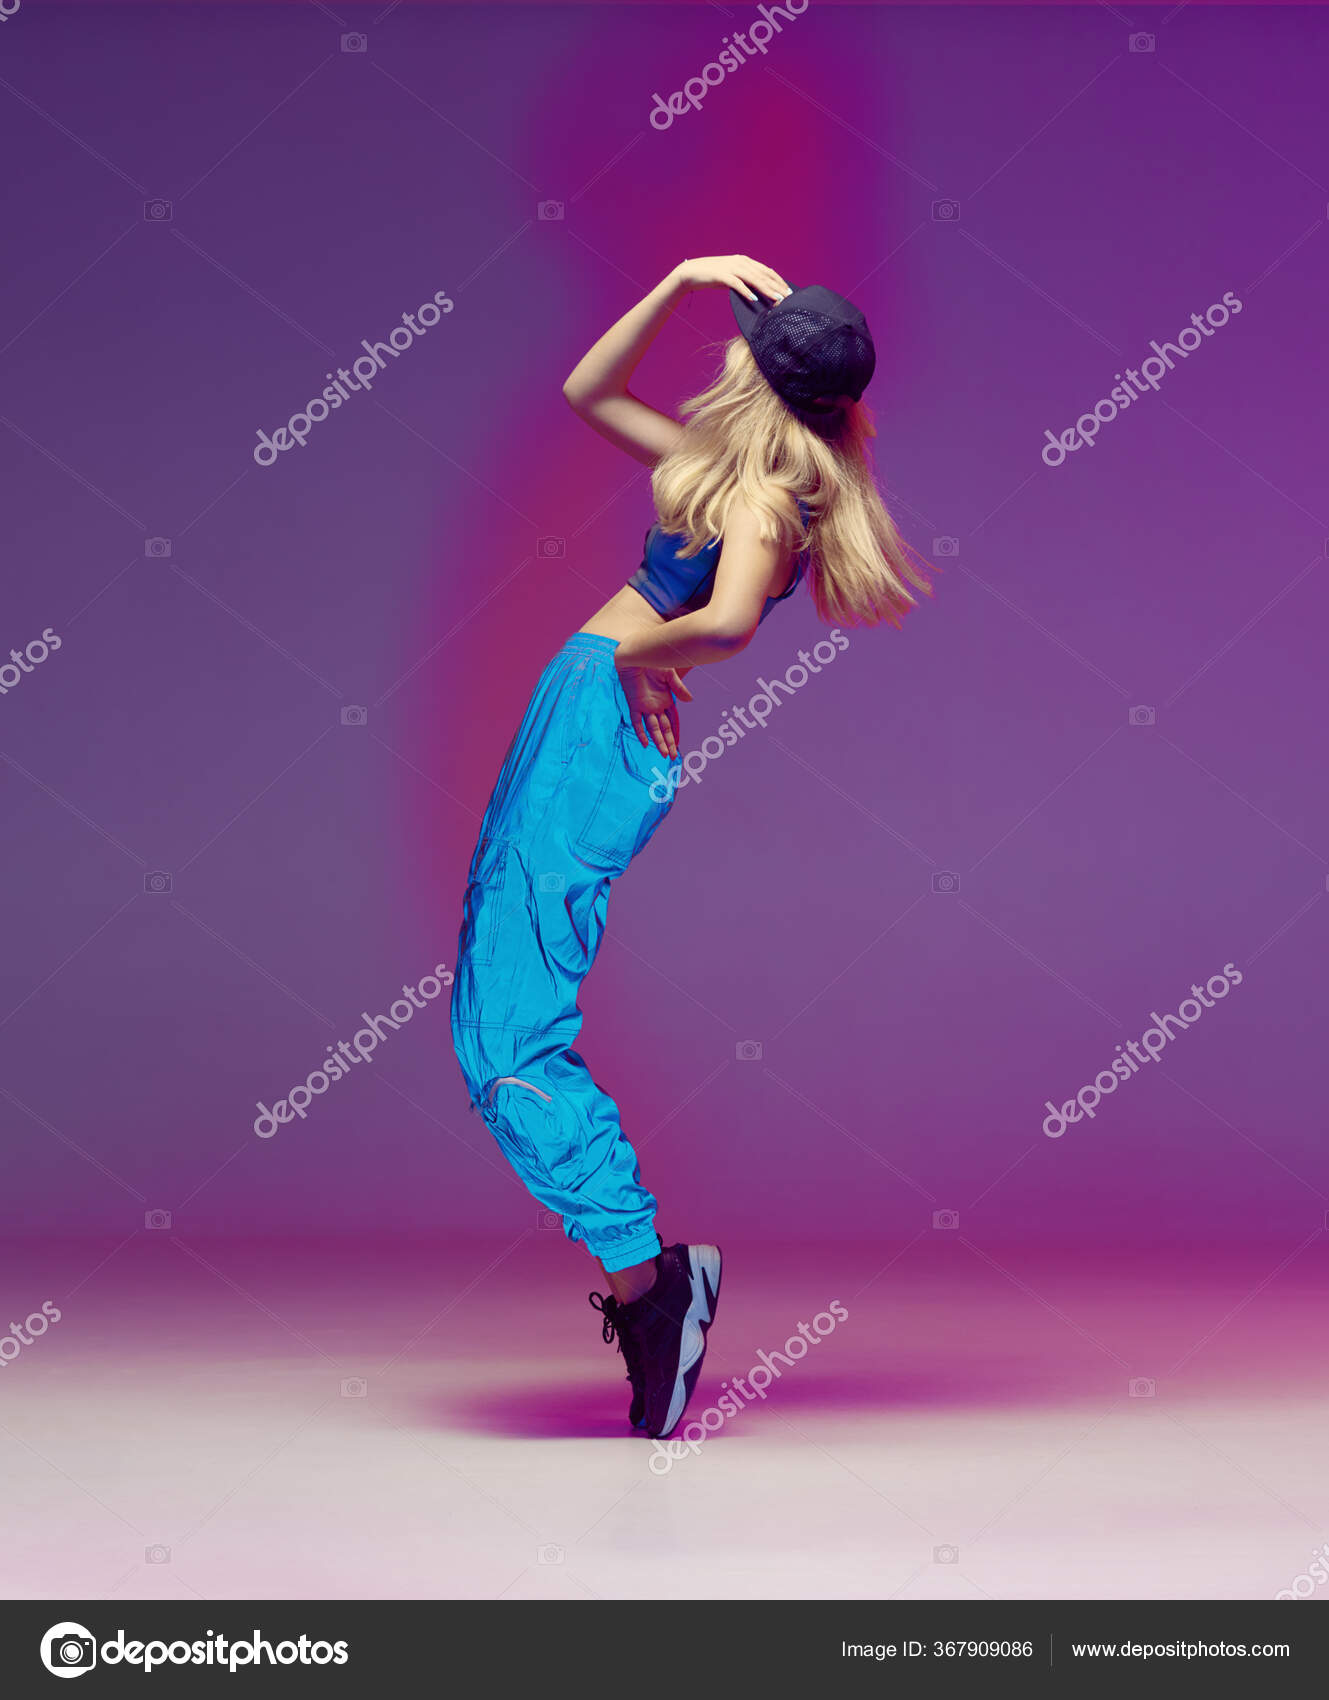 Cute teen girl dancing hip hop in reflective pants, baseball cap, in a  Studio with neon lighting. Dance color poster. Stock Photo by ©georgeeb22  367909086